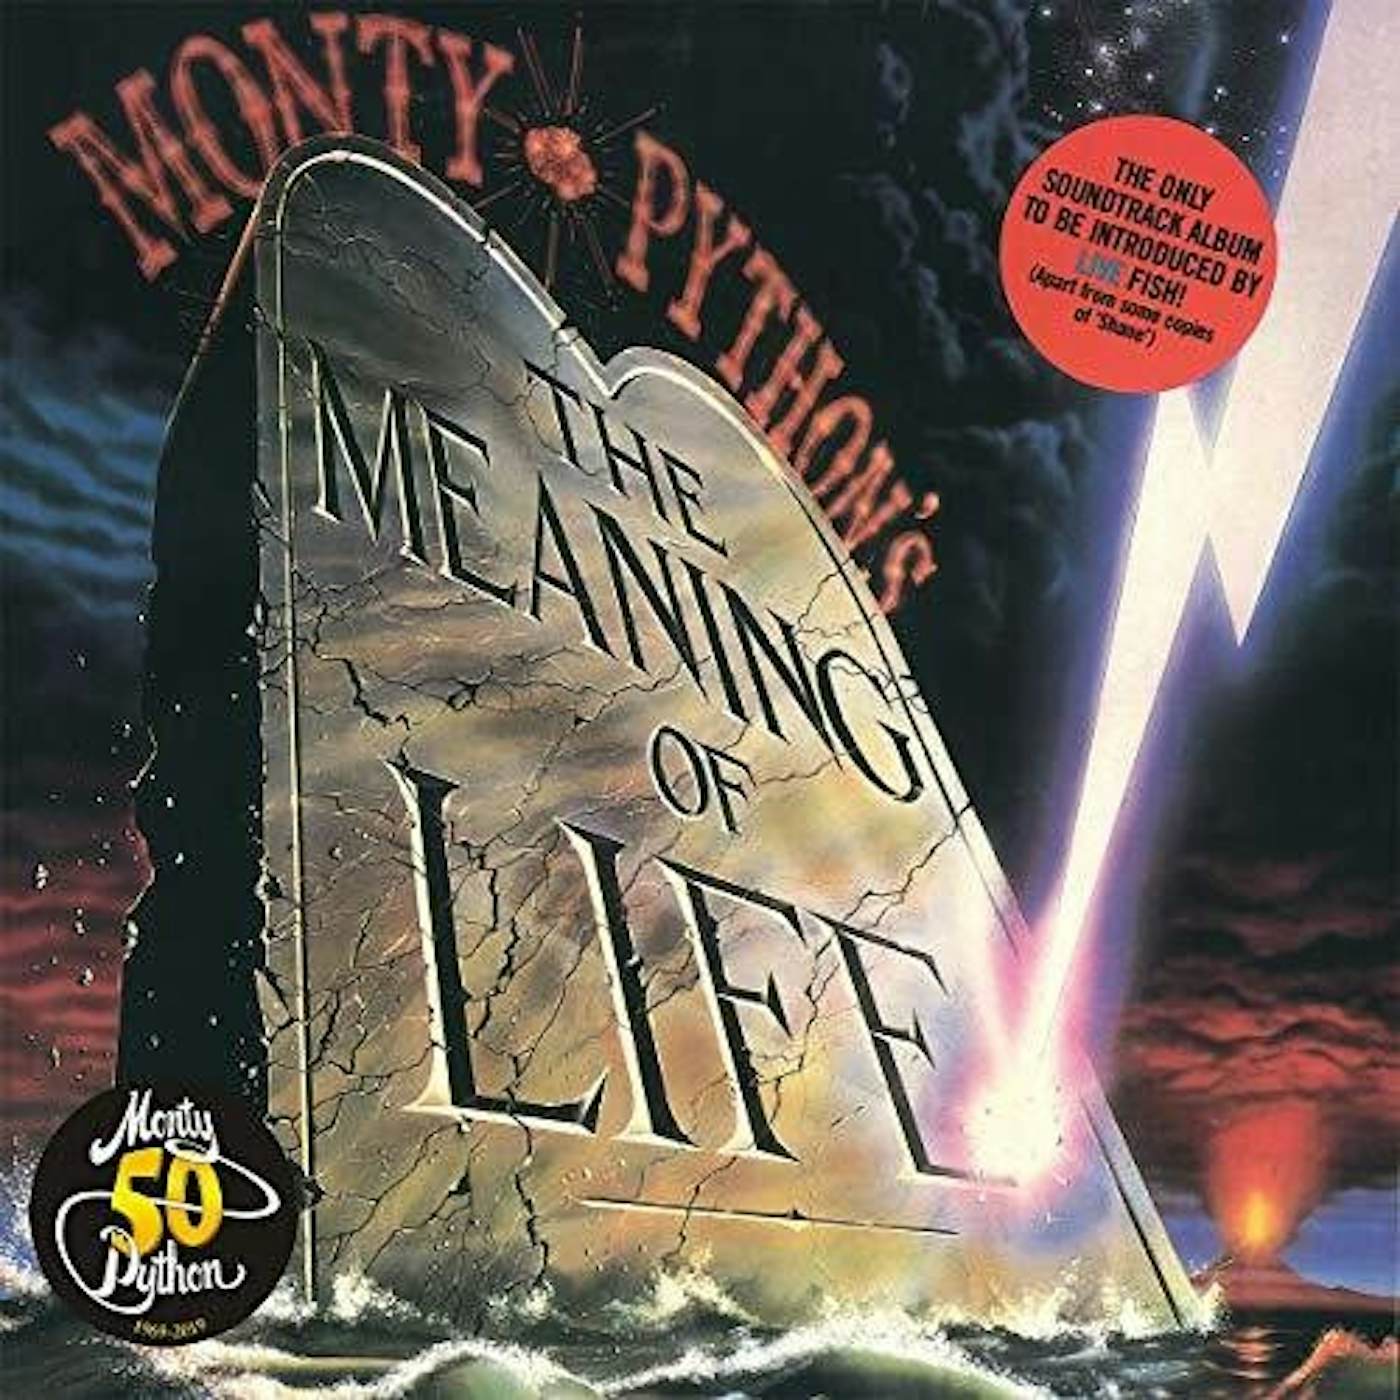 Monty Python MEANING OF LIFE Vinyl Record